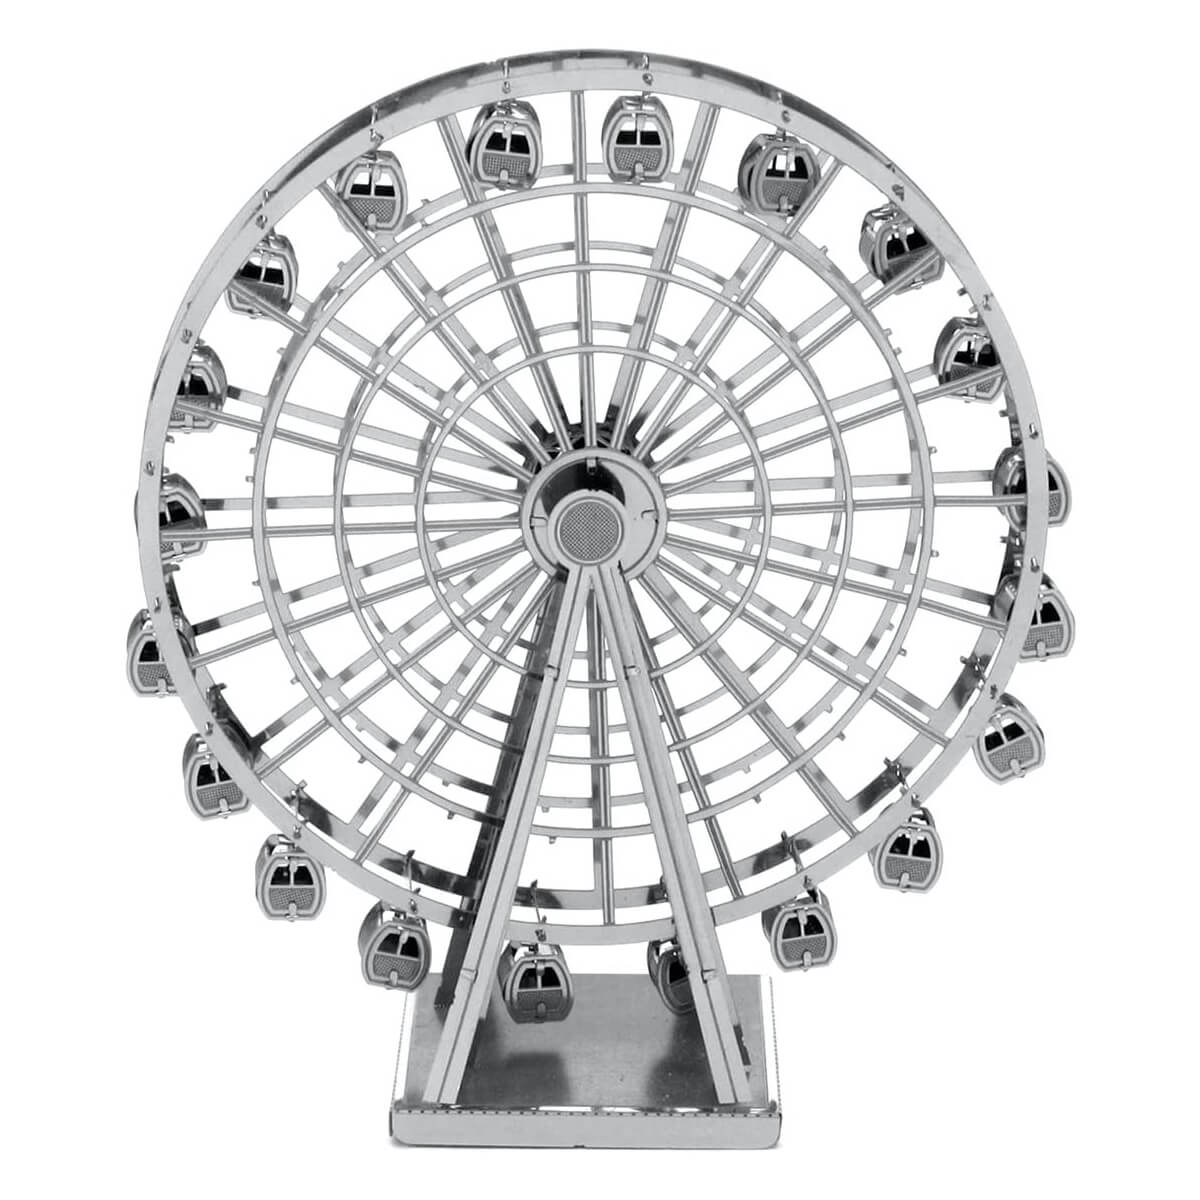 Front view of the ferris wheel.